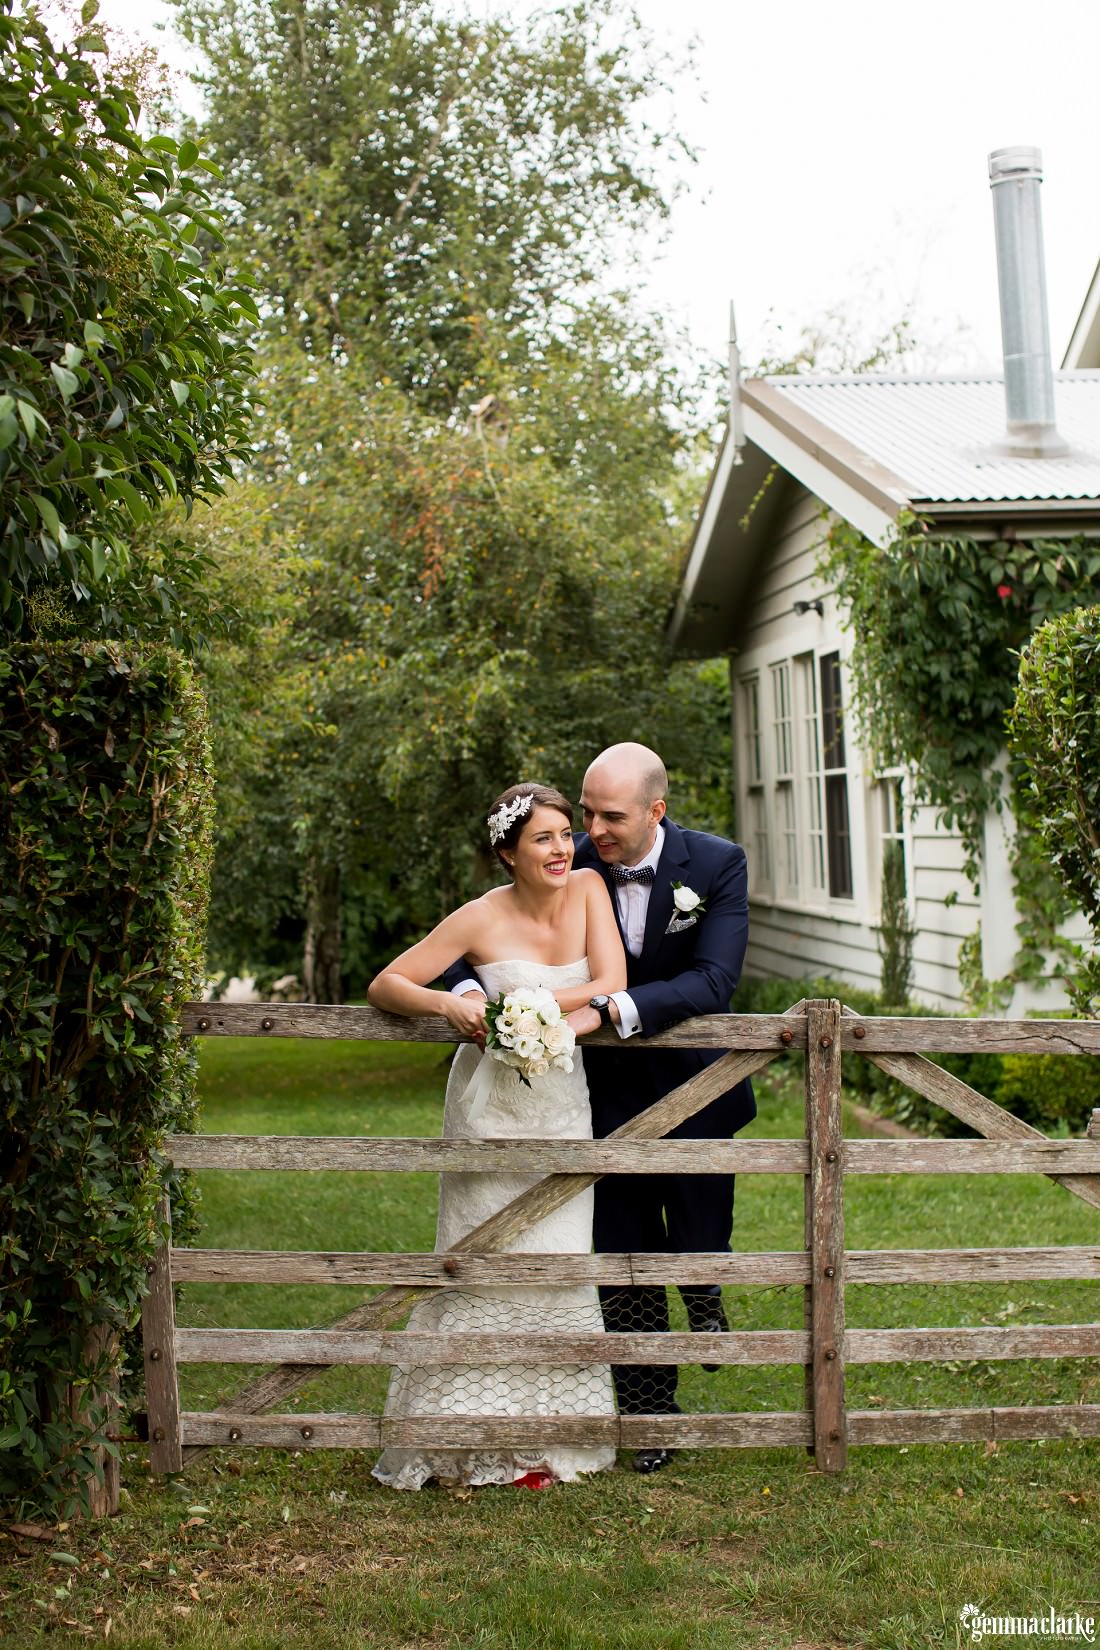 A groom embraces his smiling bride as they lean on a wooden country gate after their Summerlees wedding